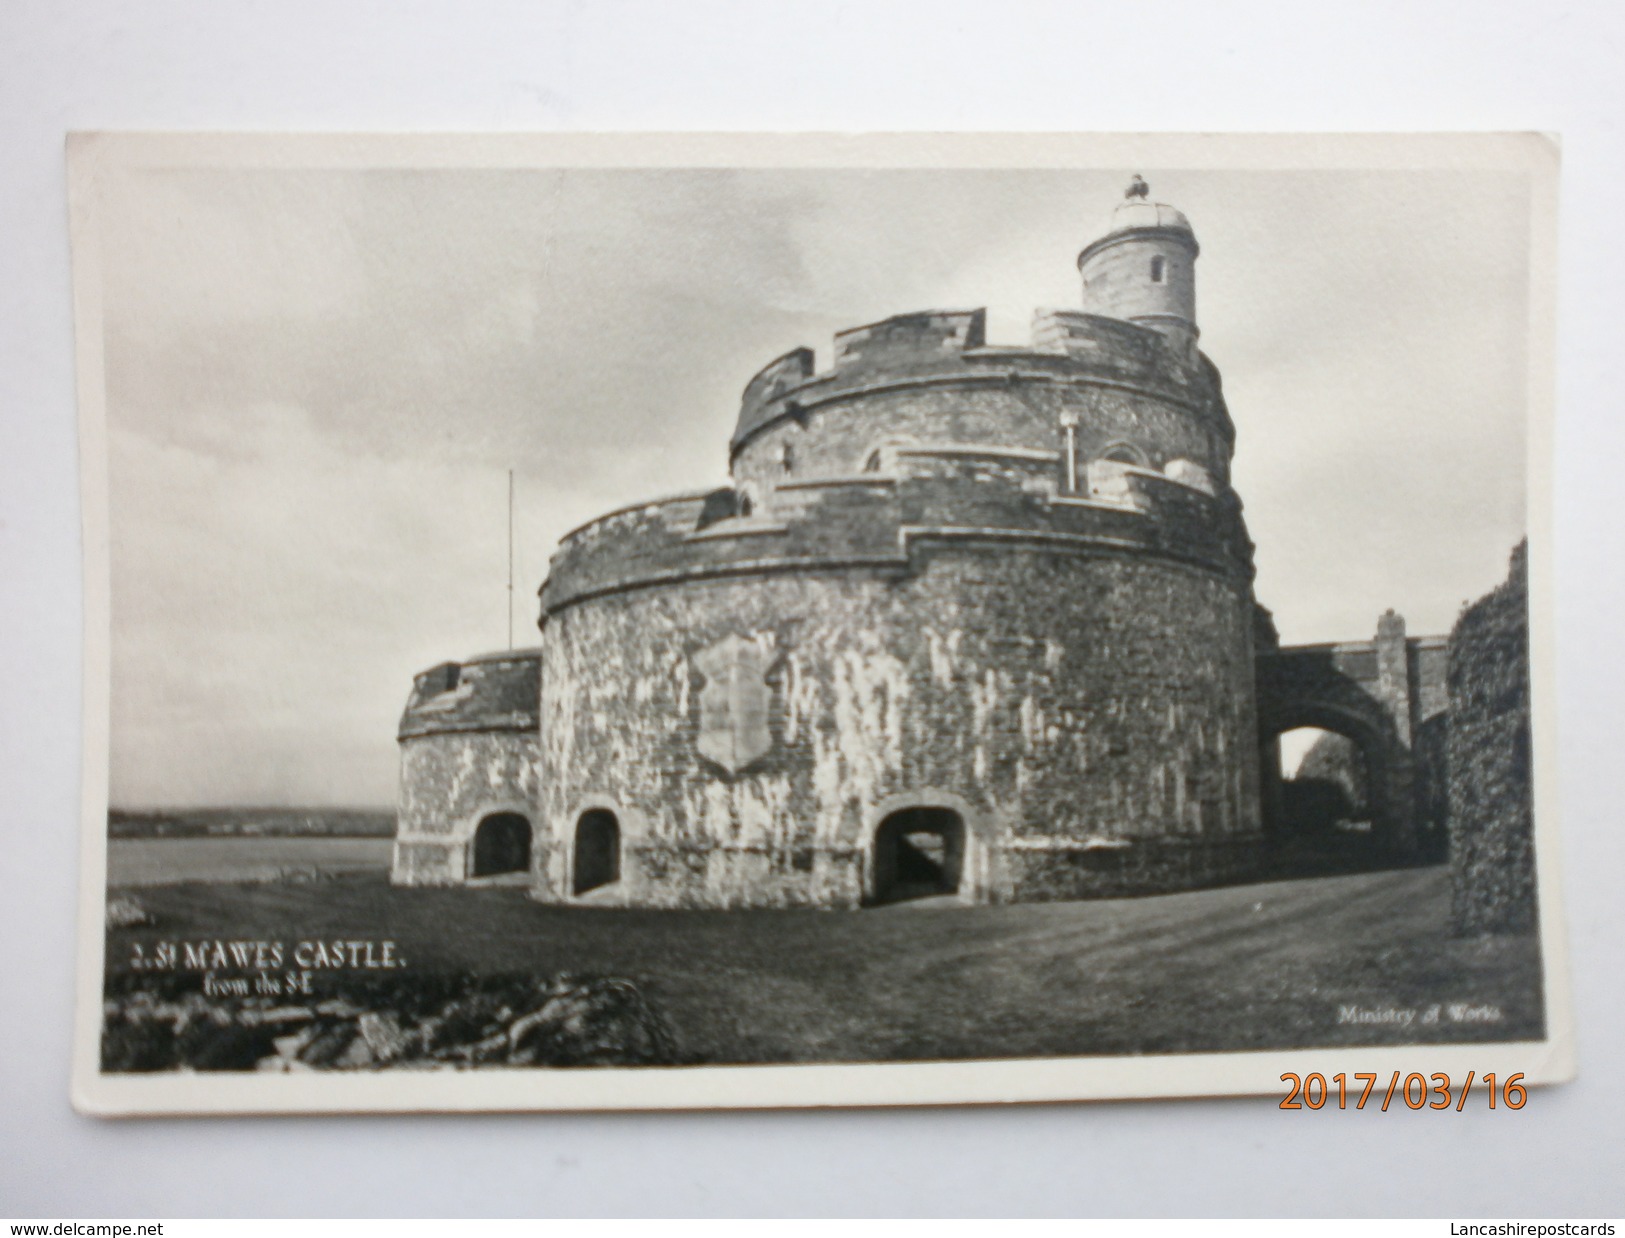 Postcard St Mawes Castle Falmouth Cornwall PU 1948 Real Photo My Ref B1987 - Falmouth